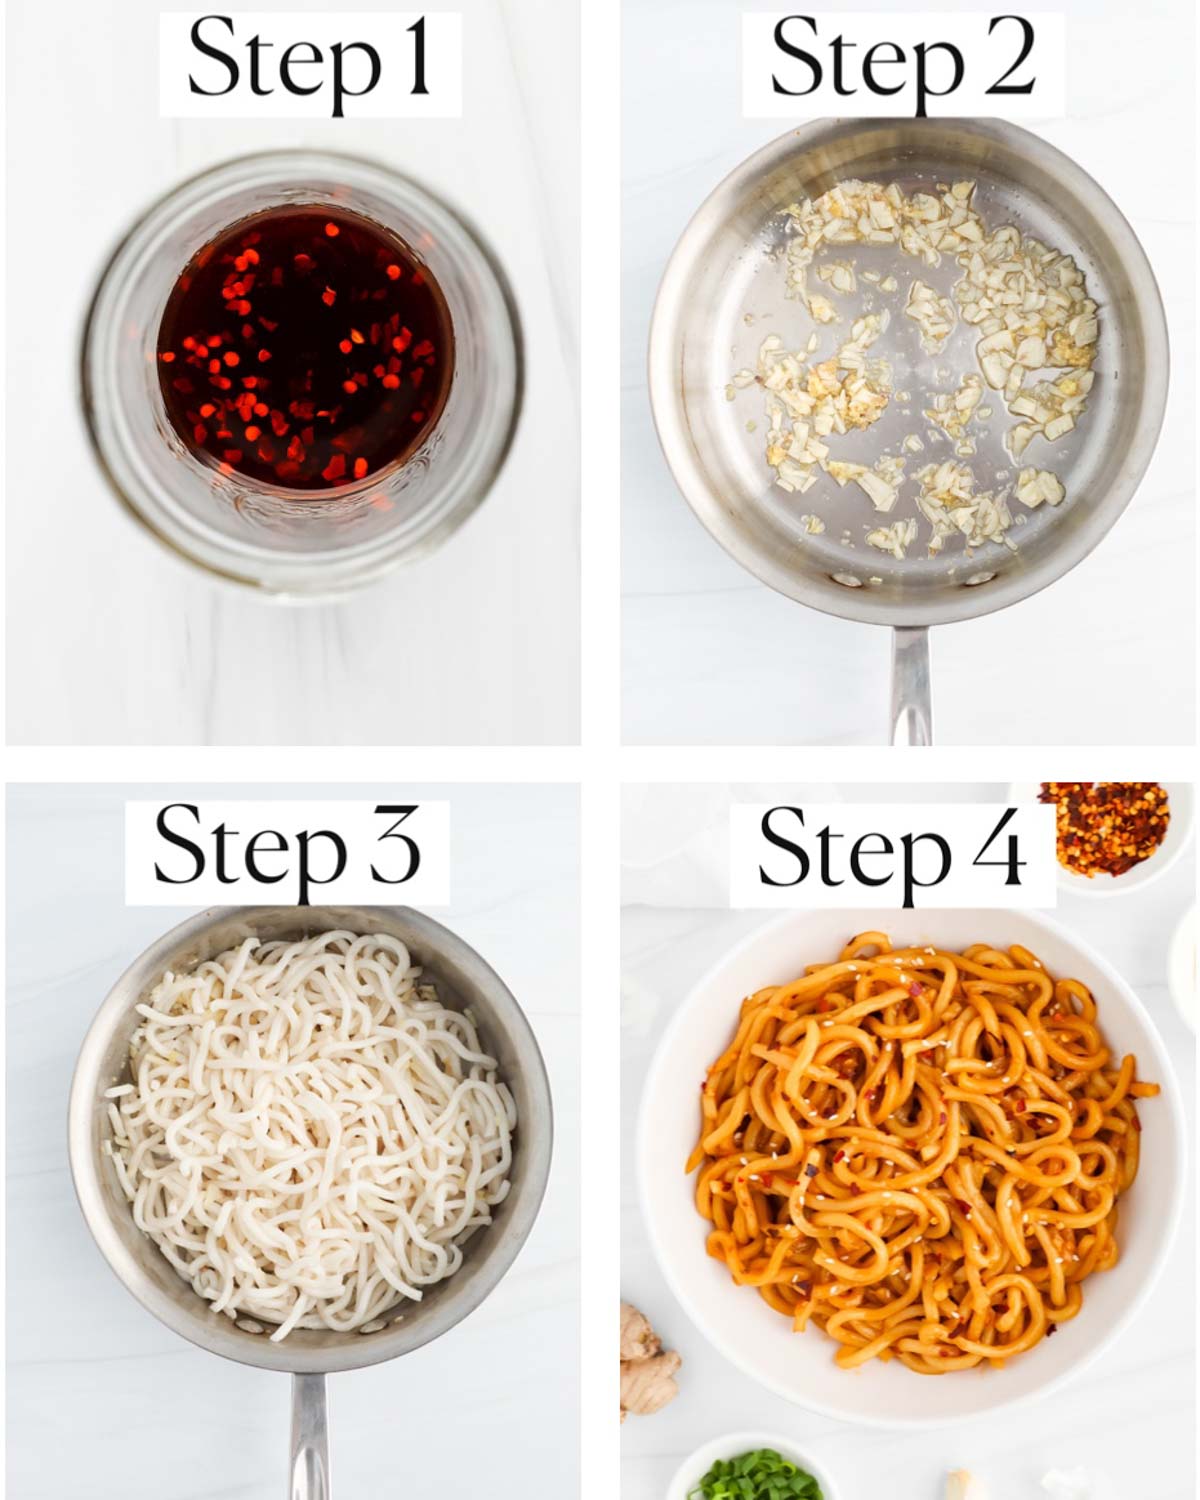 A collage of four images labeled, "step 1-step 4". Step 1: brown sauce in a cup. Step 2: garlic and ginger in a pan. Step 3: noodles in a pan. Step 4: finished noodles coated in a brown sauce.